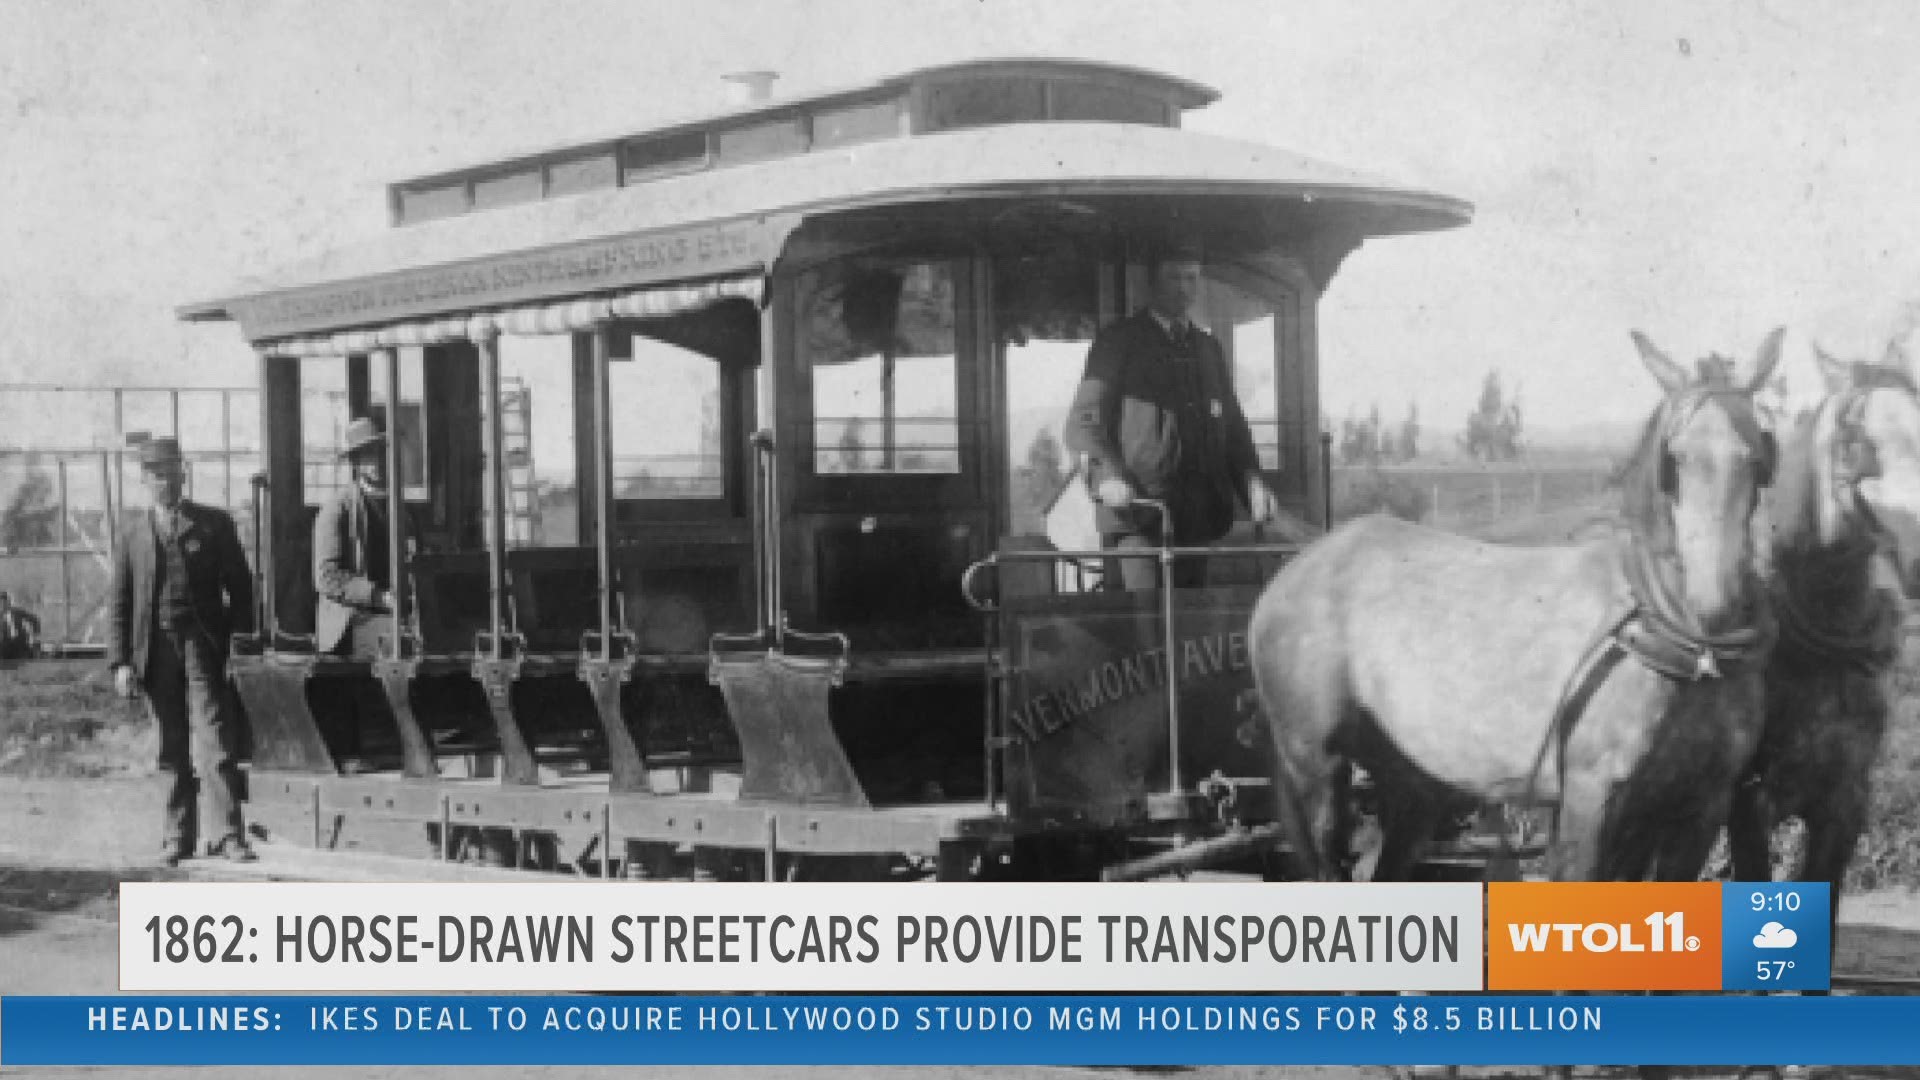 On May 27th, 1862, the Toledo Street Railway Company began operations with streetcars pulled by horses.